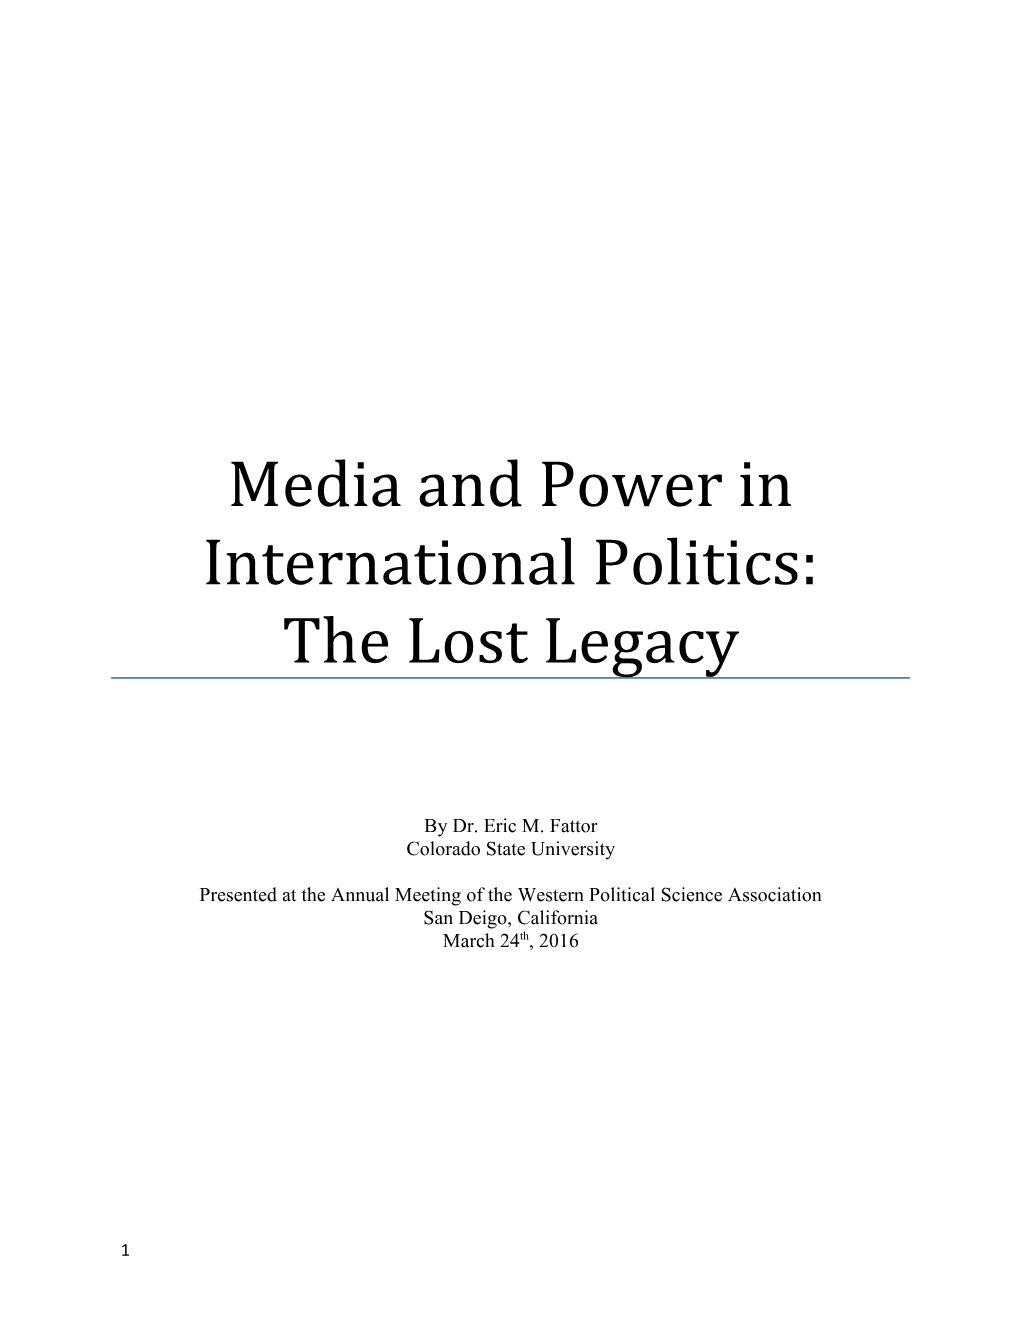 Media and Power in International Politics: the Lost Legacy